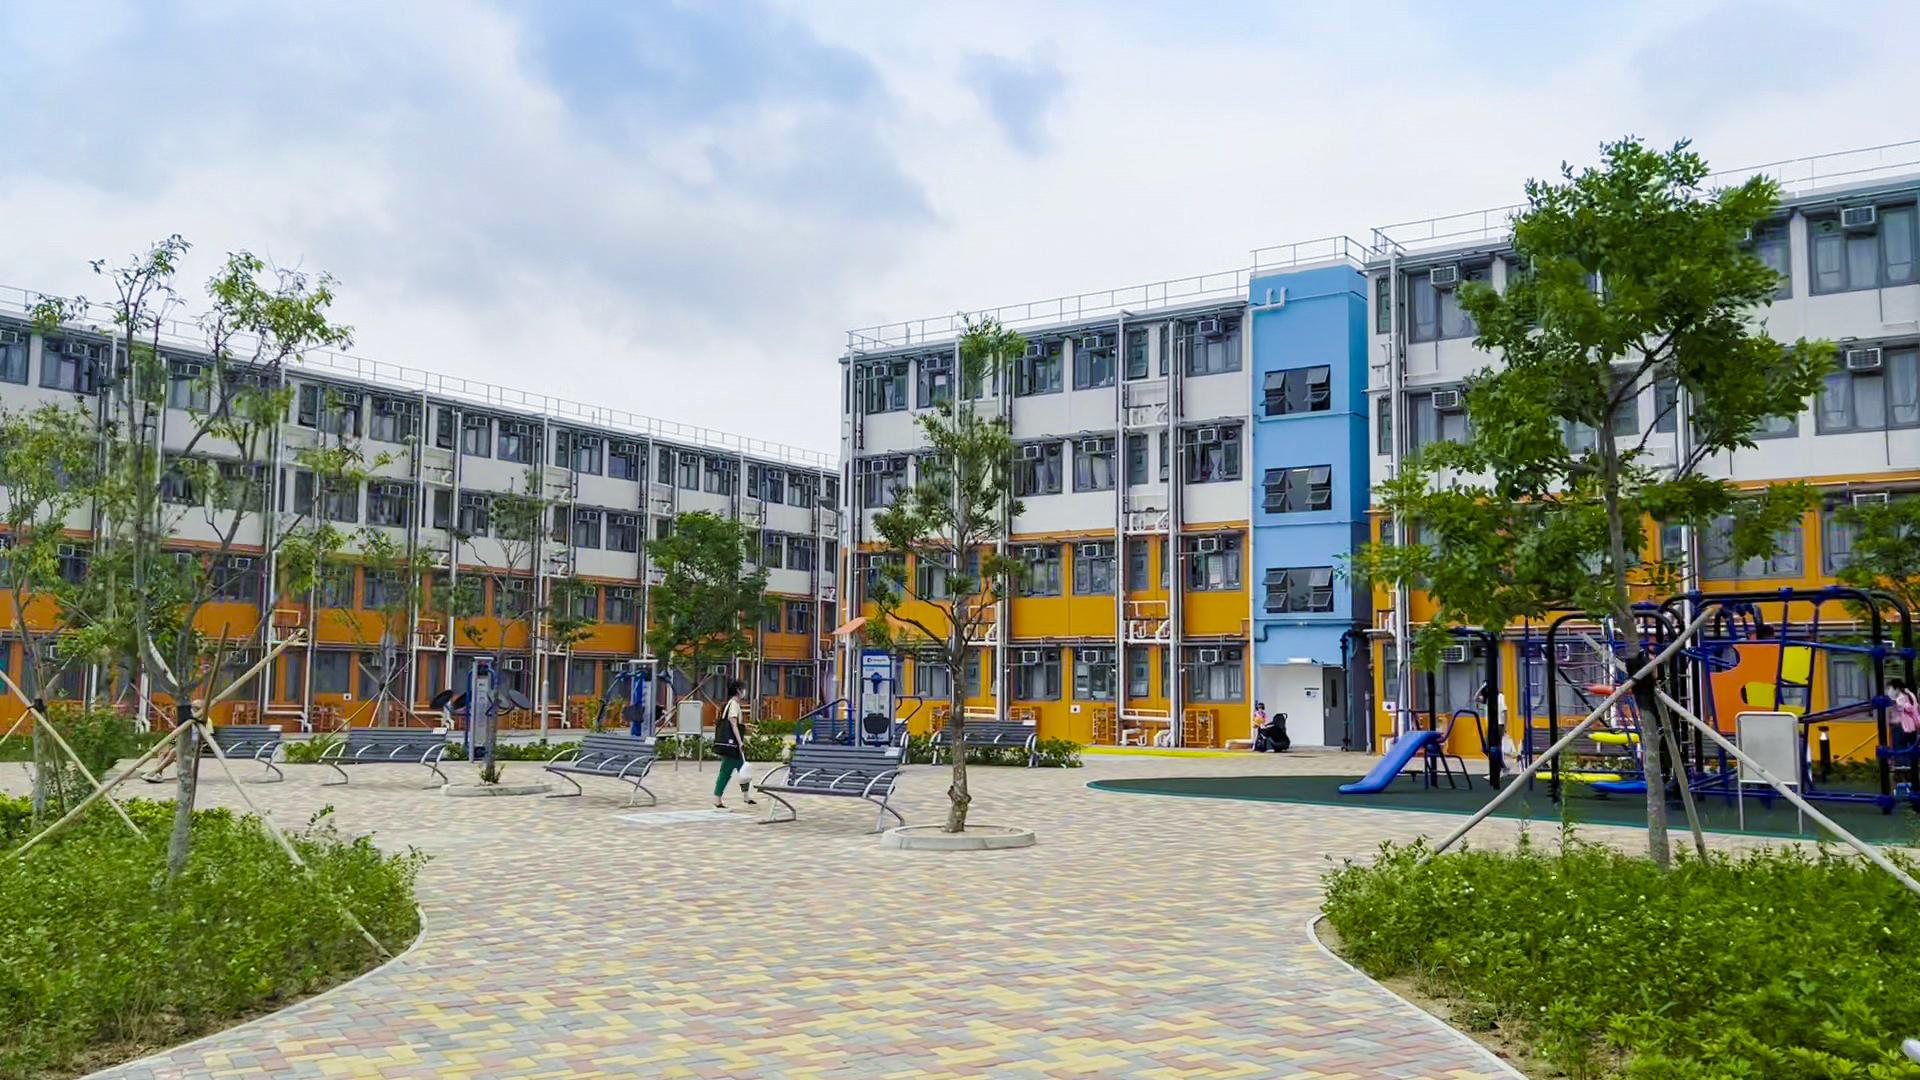 The Housing Bureau will organise a Transitional Housing Open Day on July 15 (Saturday) and provide shuttle bus services for interested parties to visit the transitional housing project at Pok Oi Kong Ha Wai Village in Kam Tin, Yuen Long. Photo shows the Pok Oi Kong Ha Wai Village.